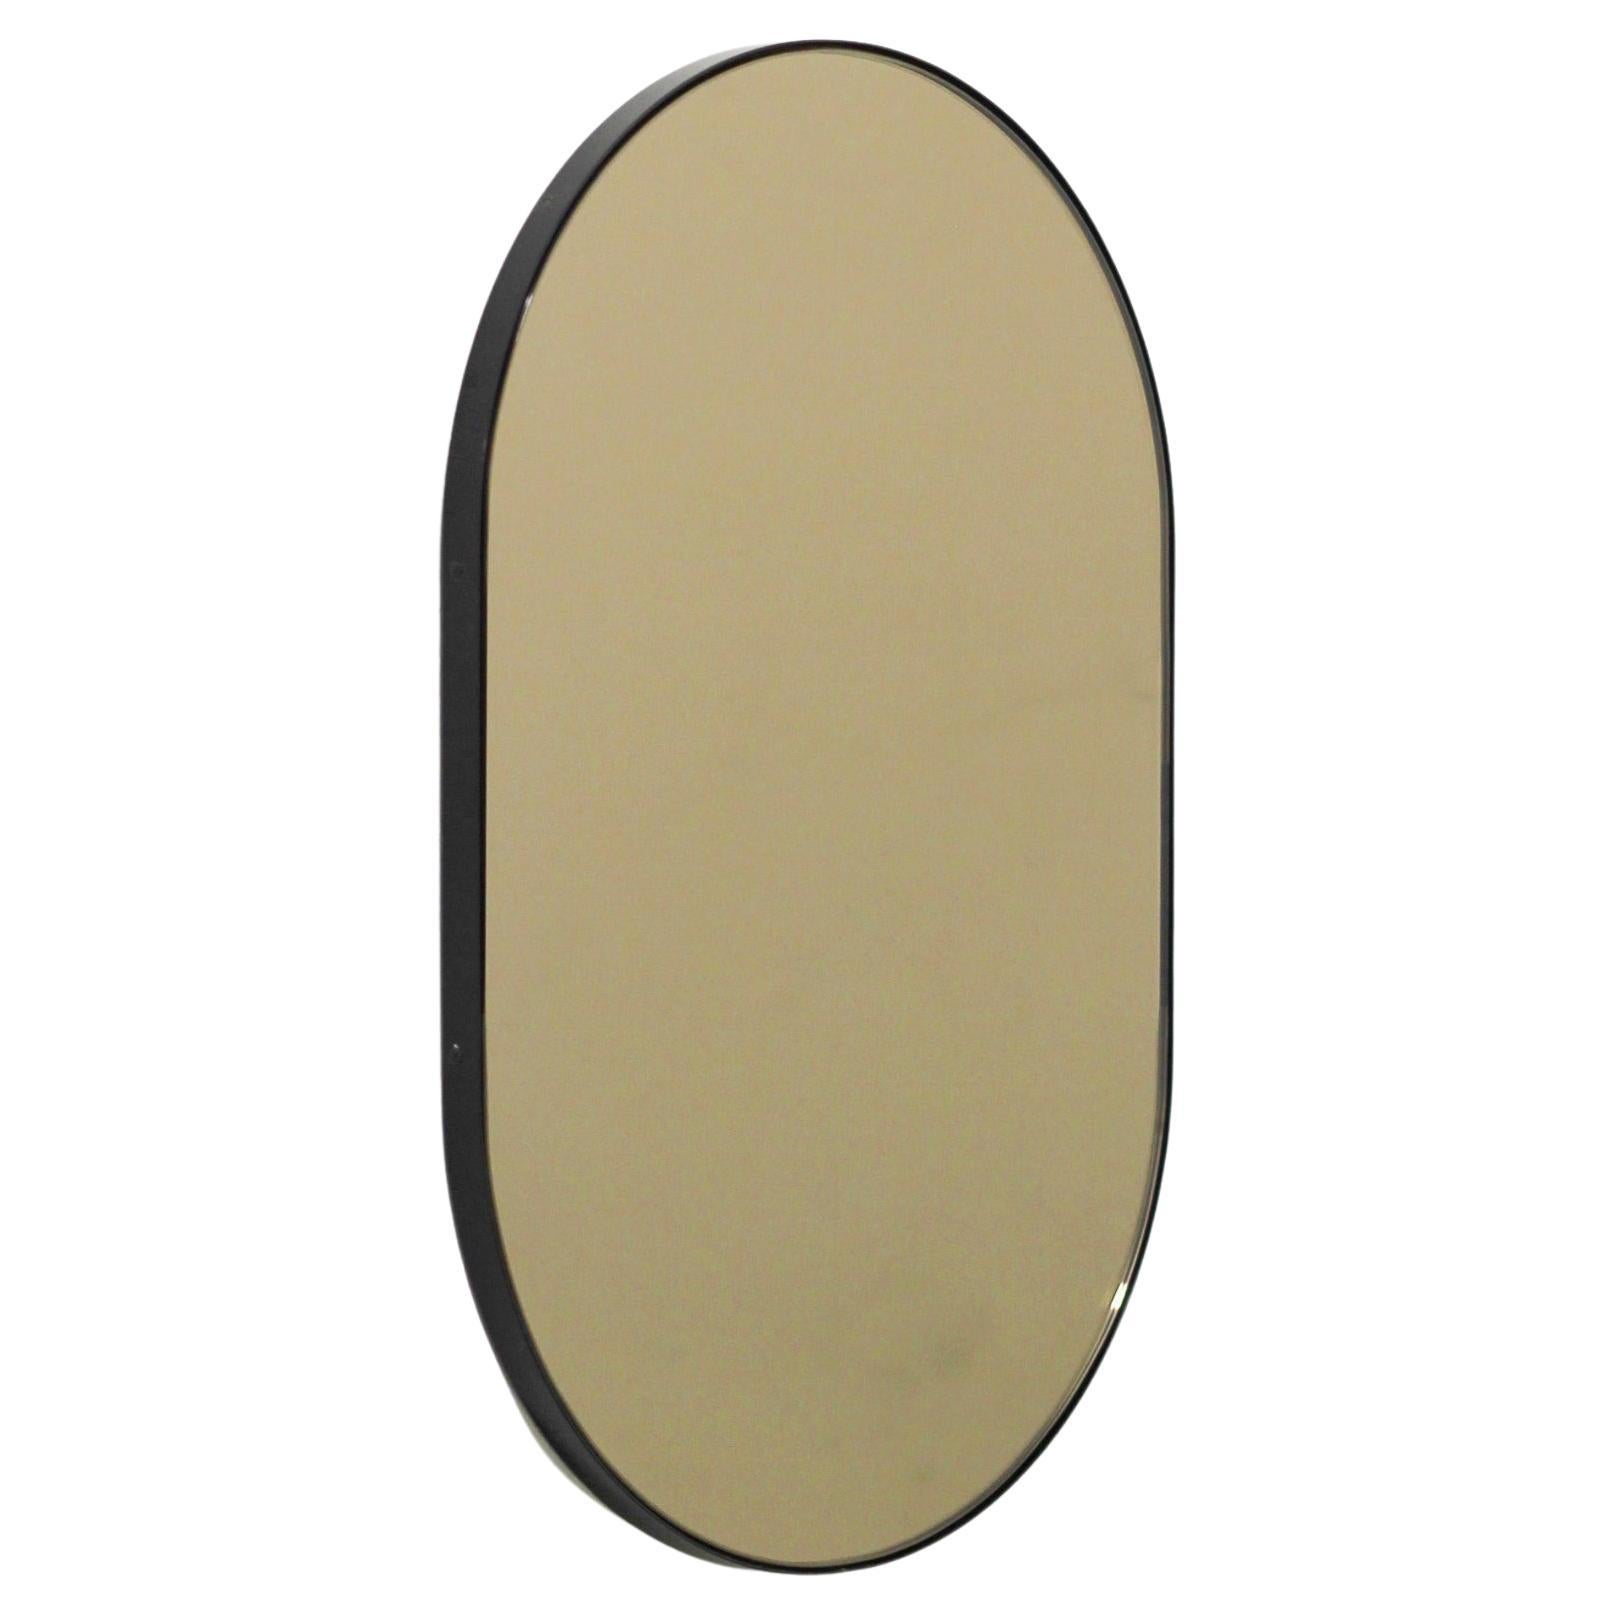 Capsula Capsule shaped Bronze Contemporary Mirror with Black Frame, Large For Sale